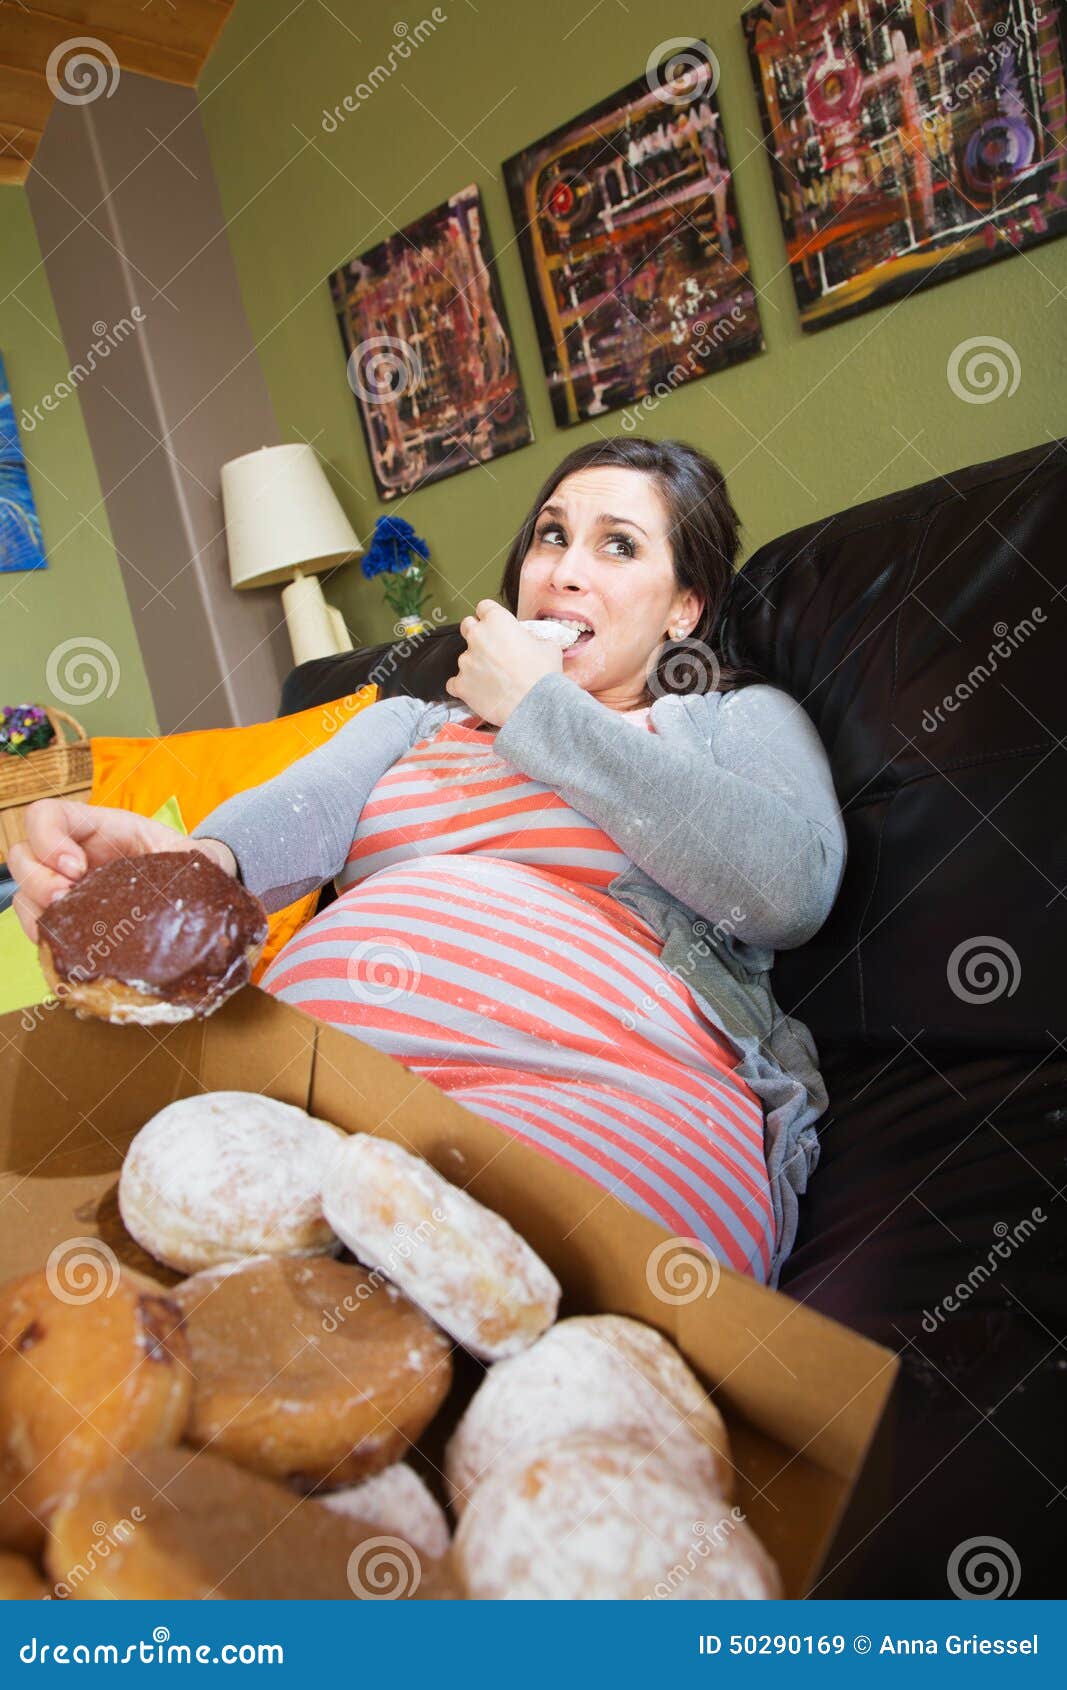 Pregnant Woman Eating Donuts Stock Photo - Image: 50290169